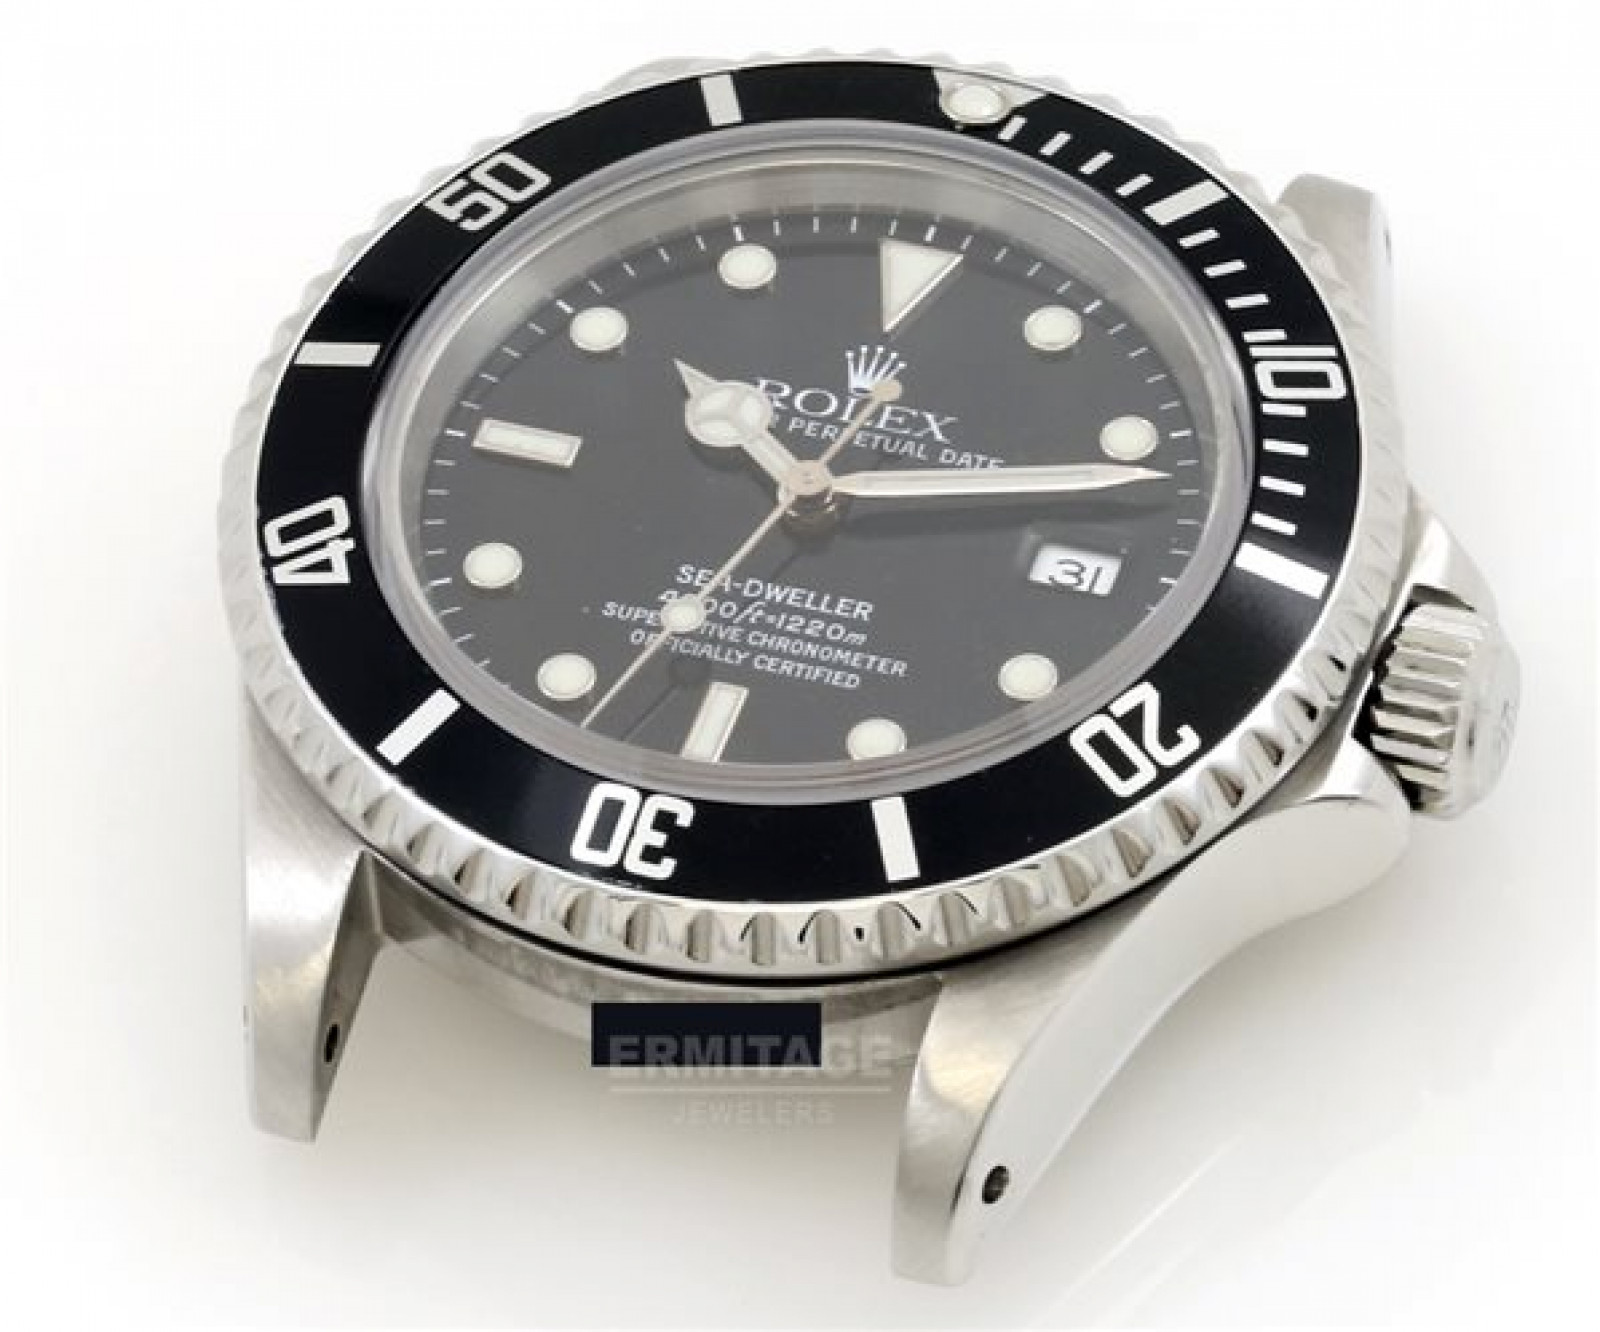 Pre-Owned Rolex Sea-Dweller 16600 Stainless Steel